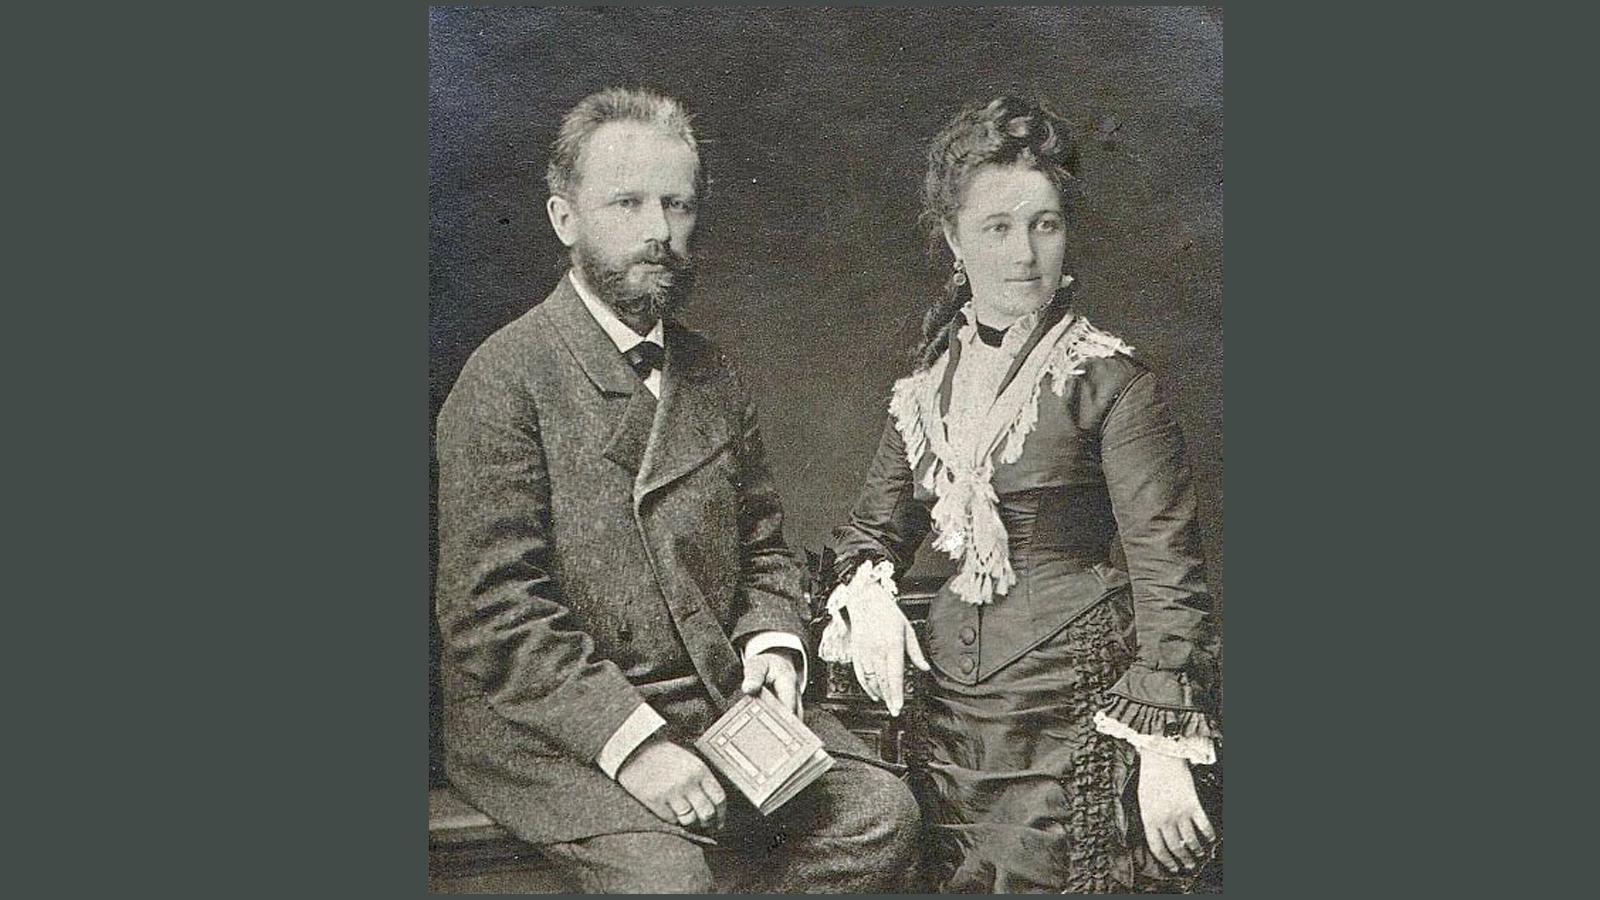 Tchaikovsky and his wife, Antonina Miliukova pose for a wedding portrait in 1877. Their marriage lasted just two months.